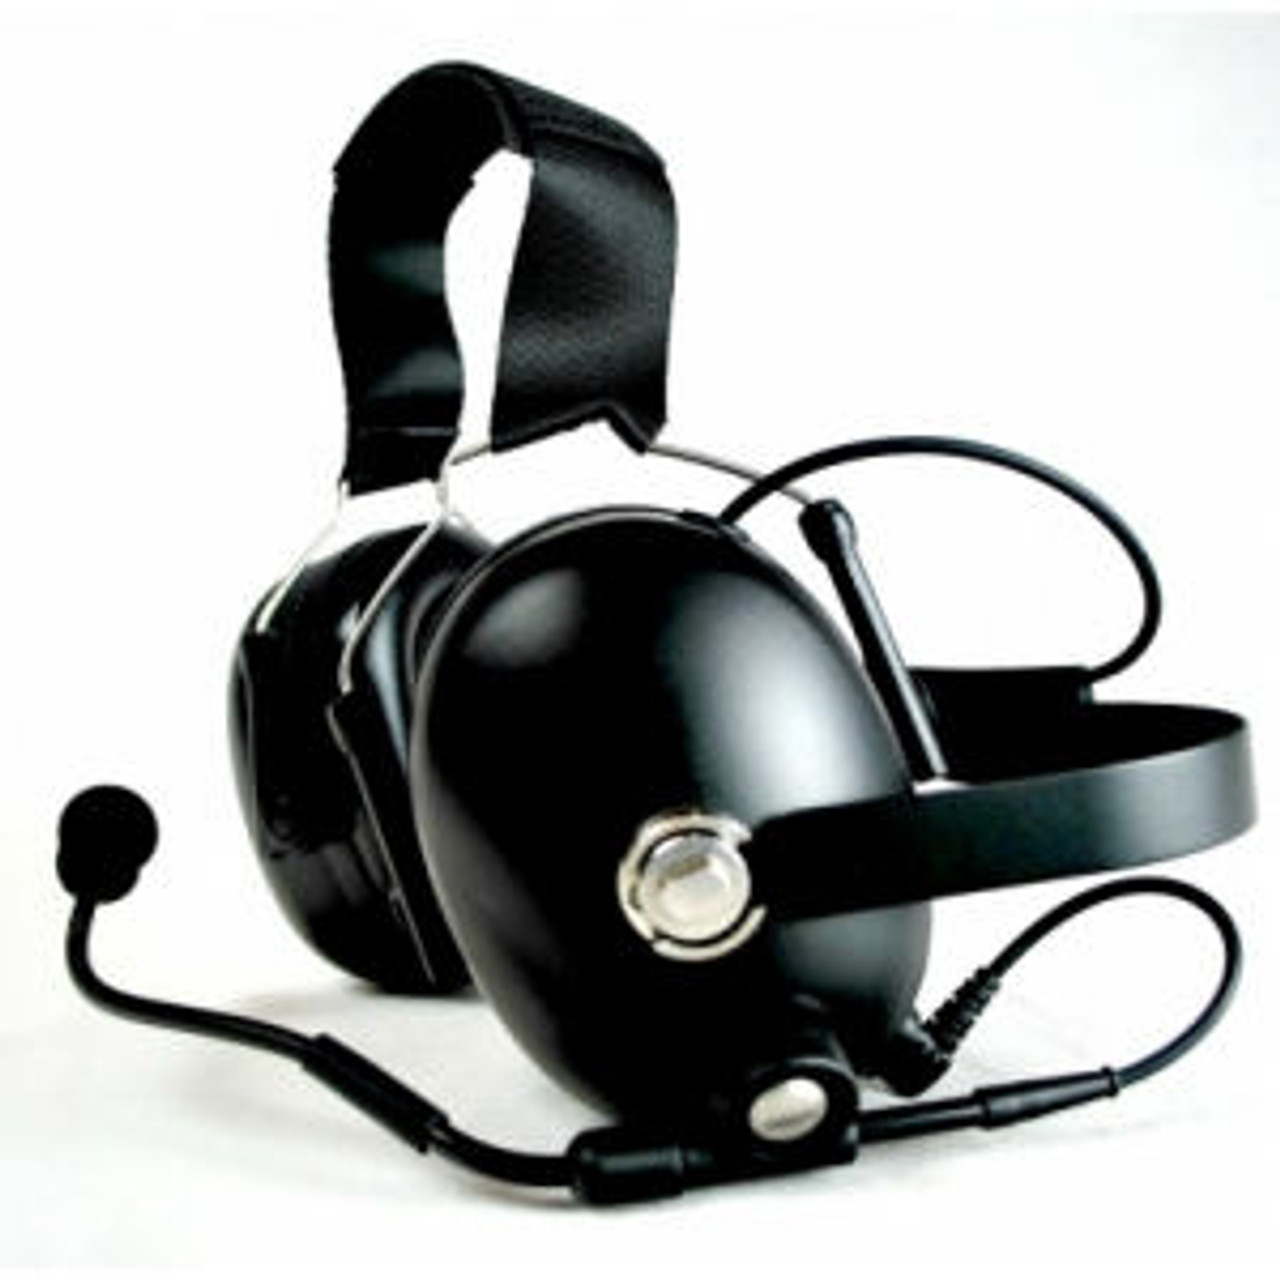 M/A-Com P7250 Noise Canceling Double Muff Behind The Head Headset